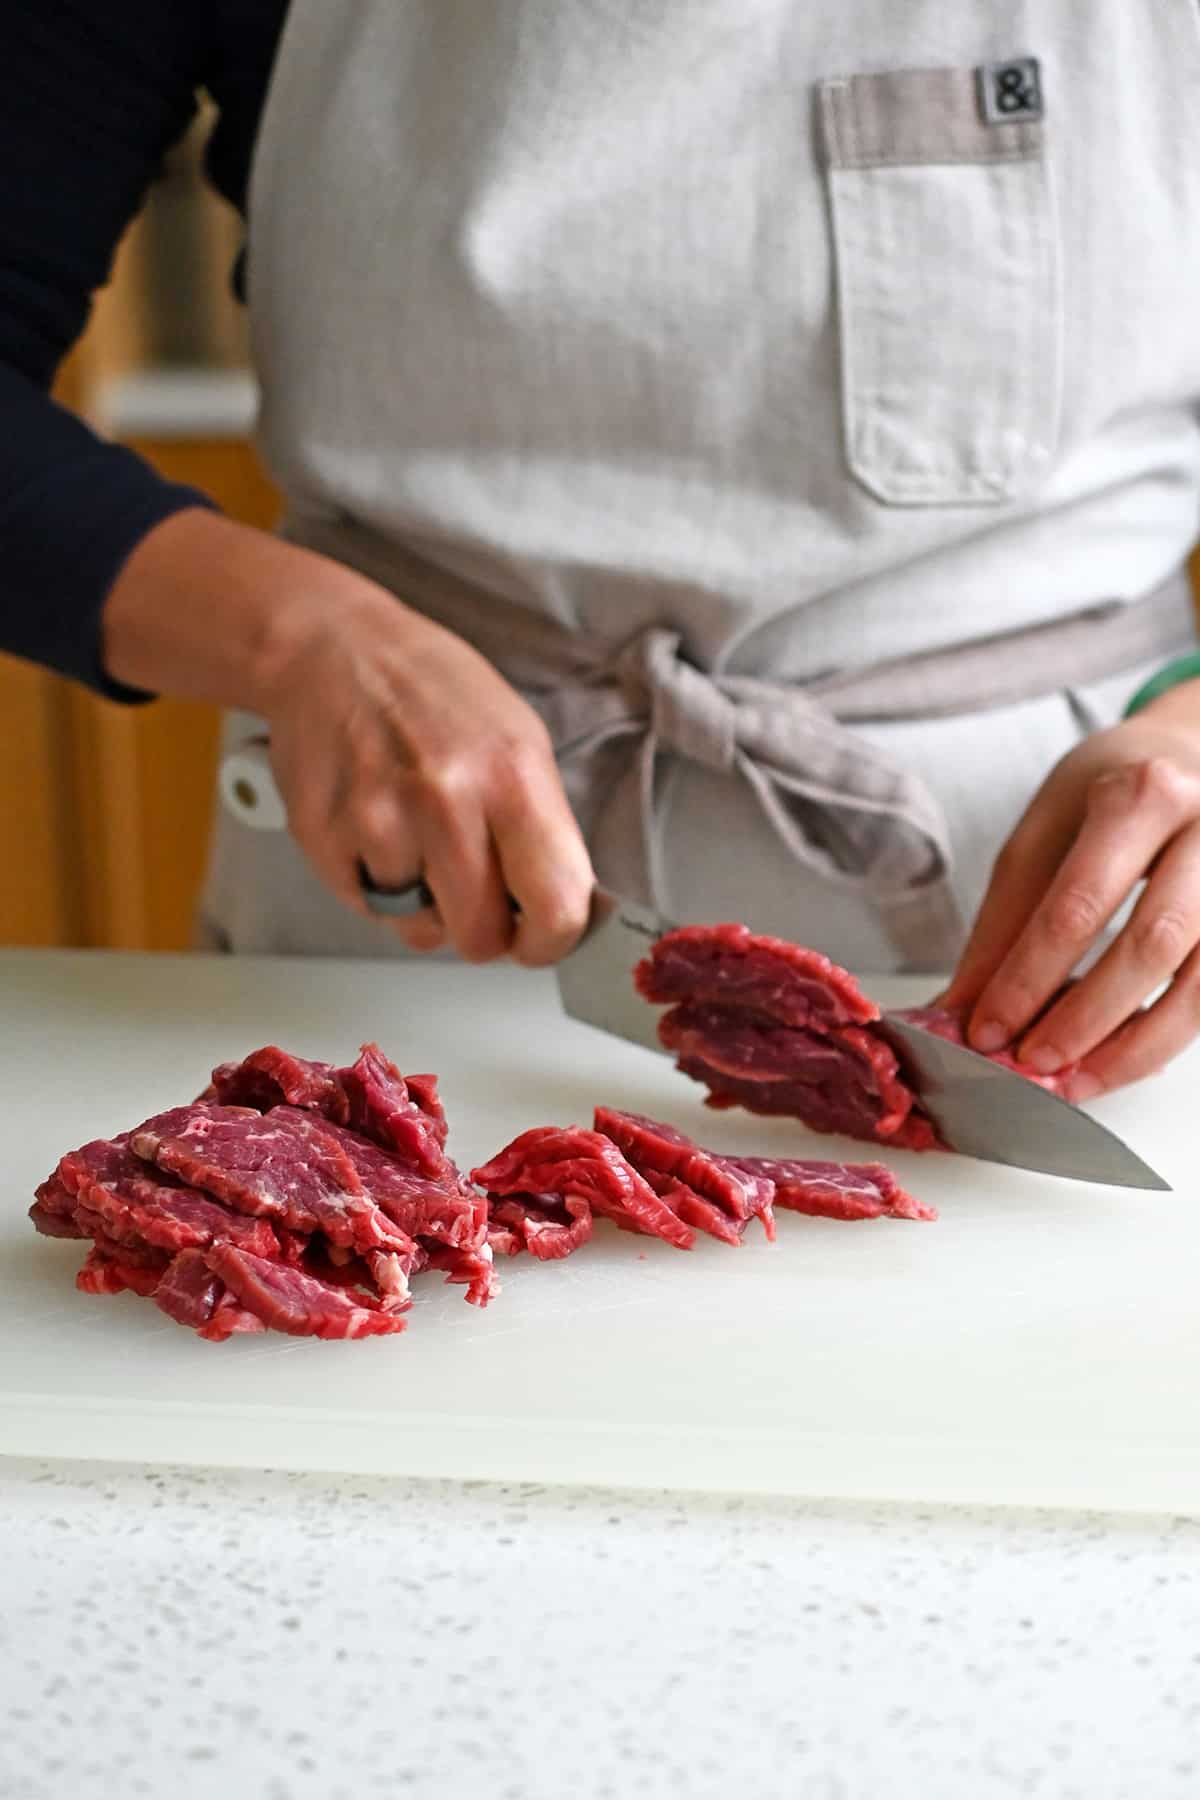 Slicing raw flank steak into thin strips against the grain with a chef's knife.